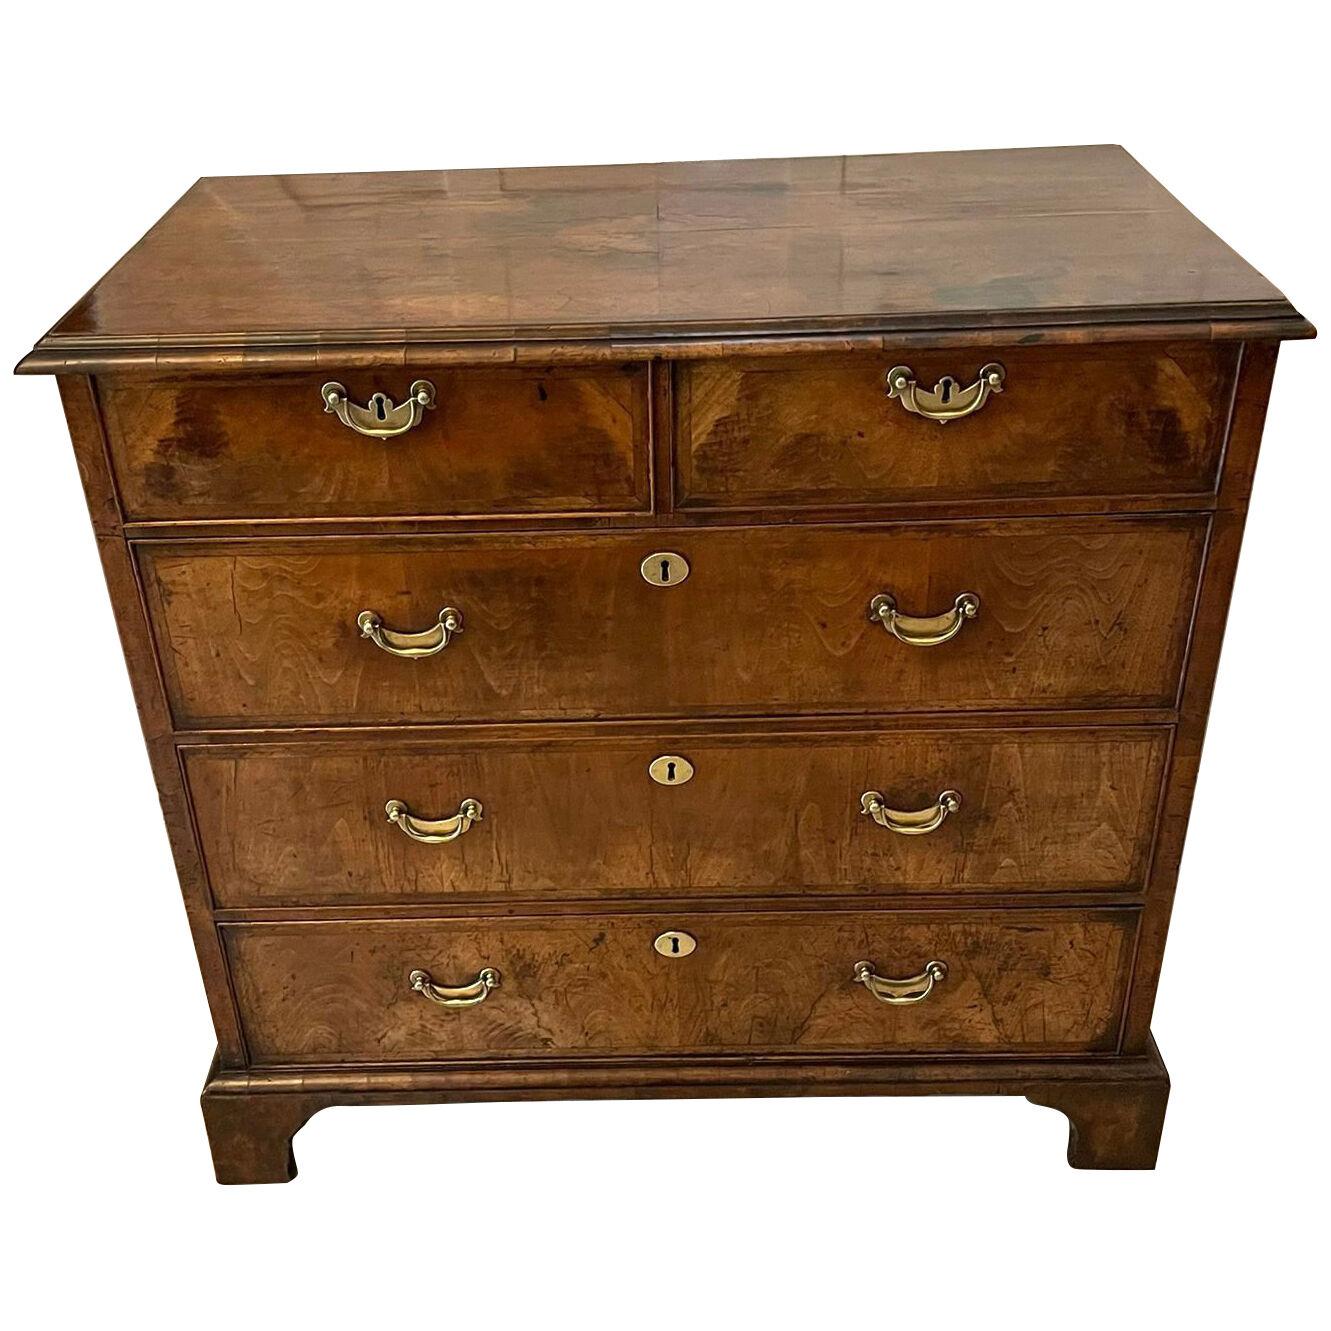 Outstanding Original George I Antique Quality Figured Walnut Chest of Drawers 